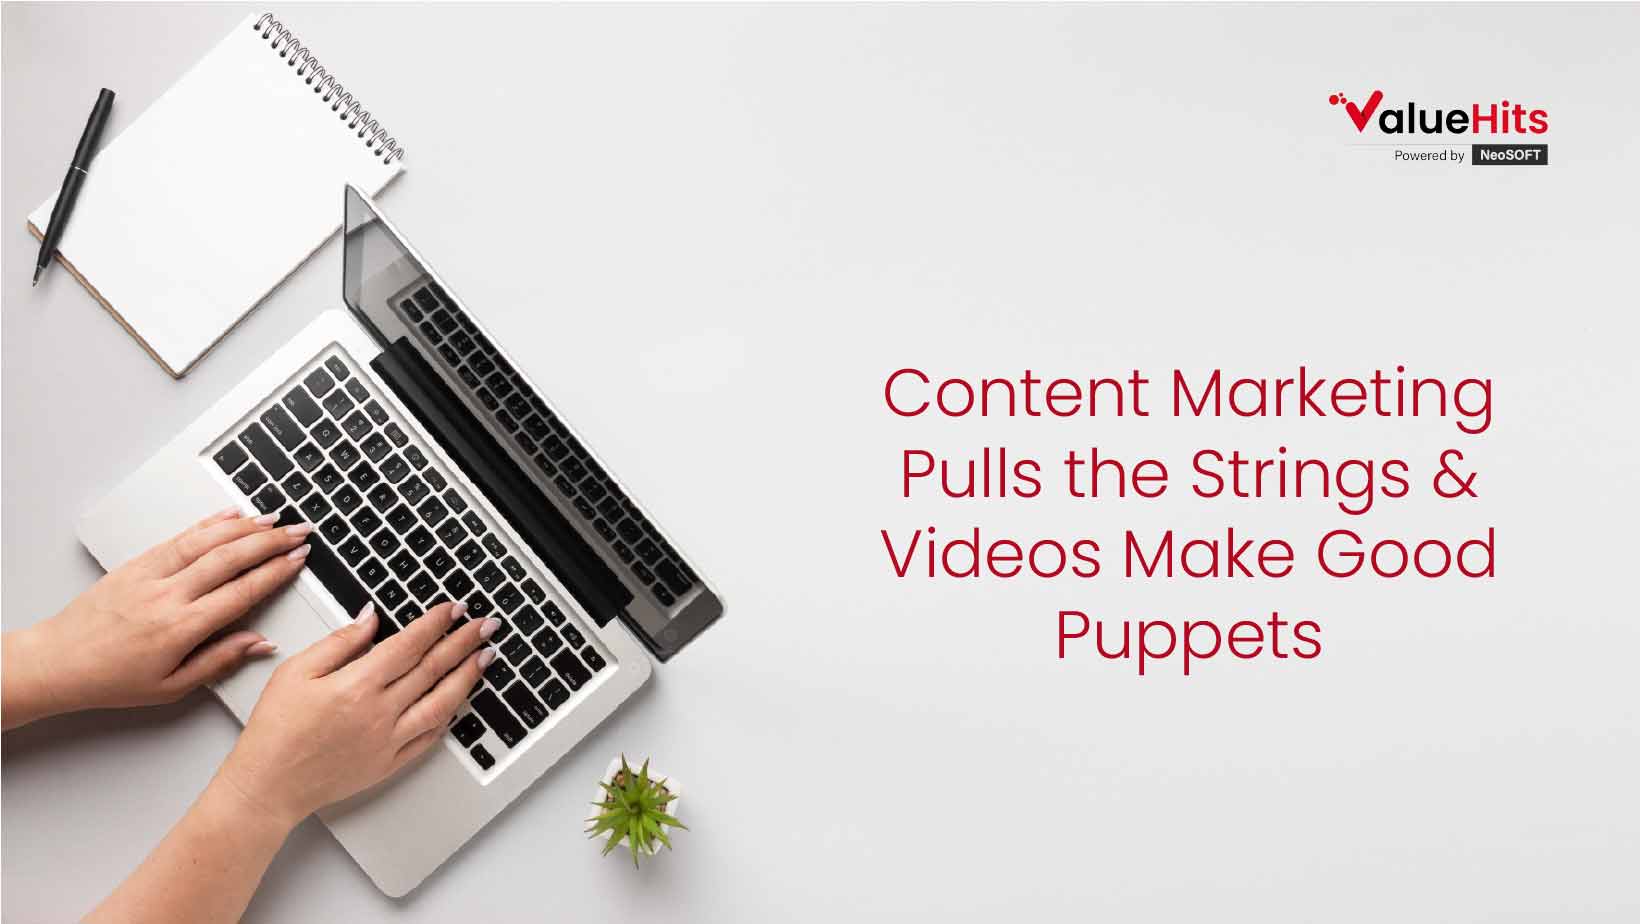 Content Marketing Pulls the Strings & Videos Make Good Puppets